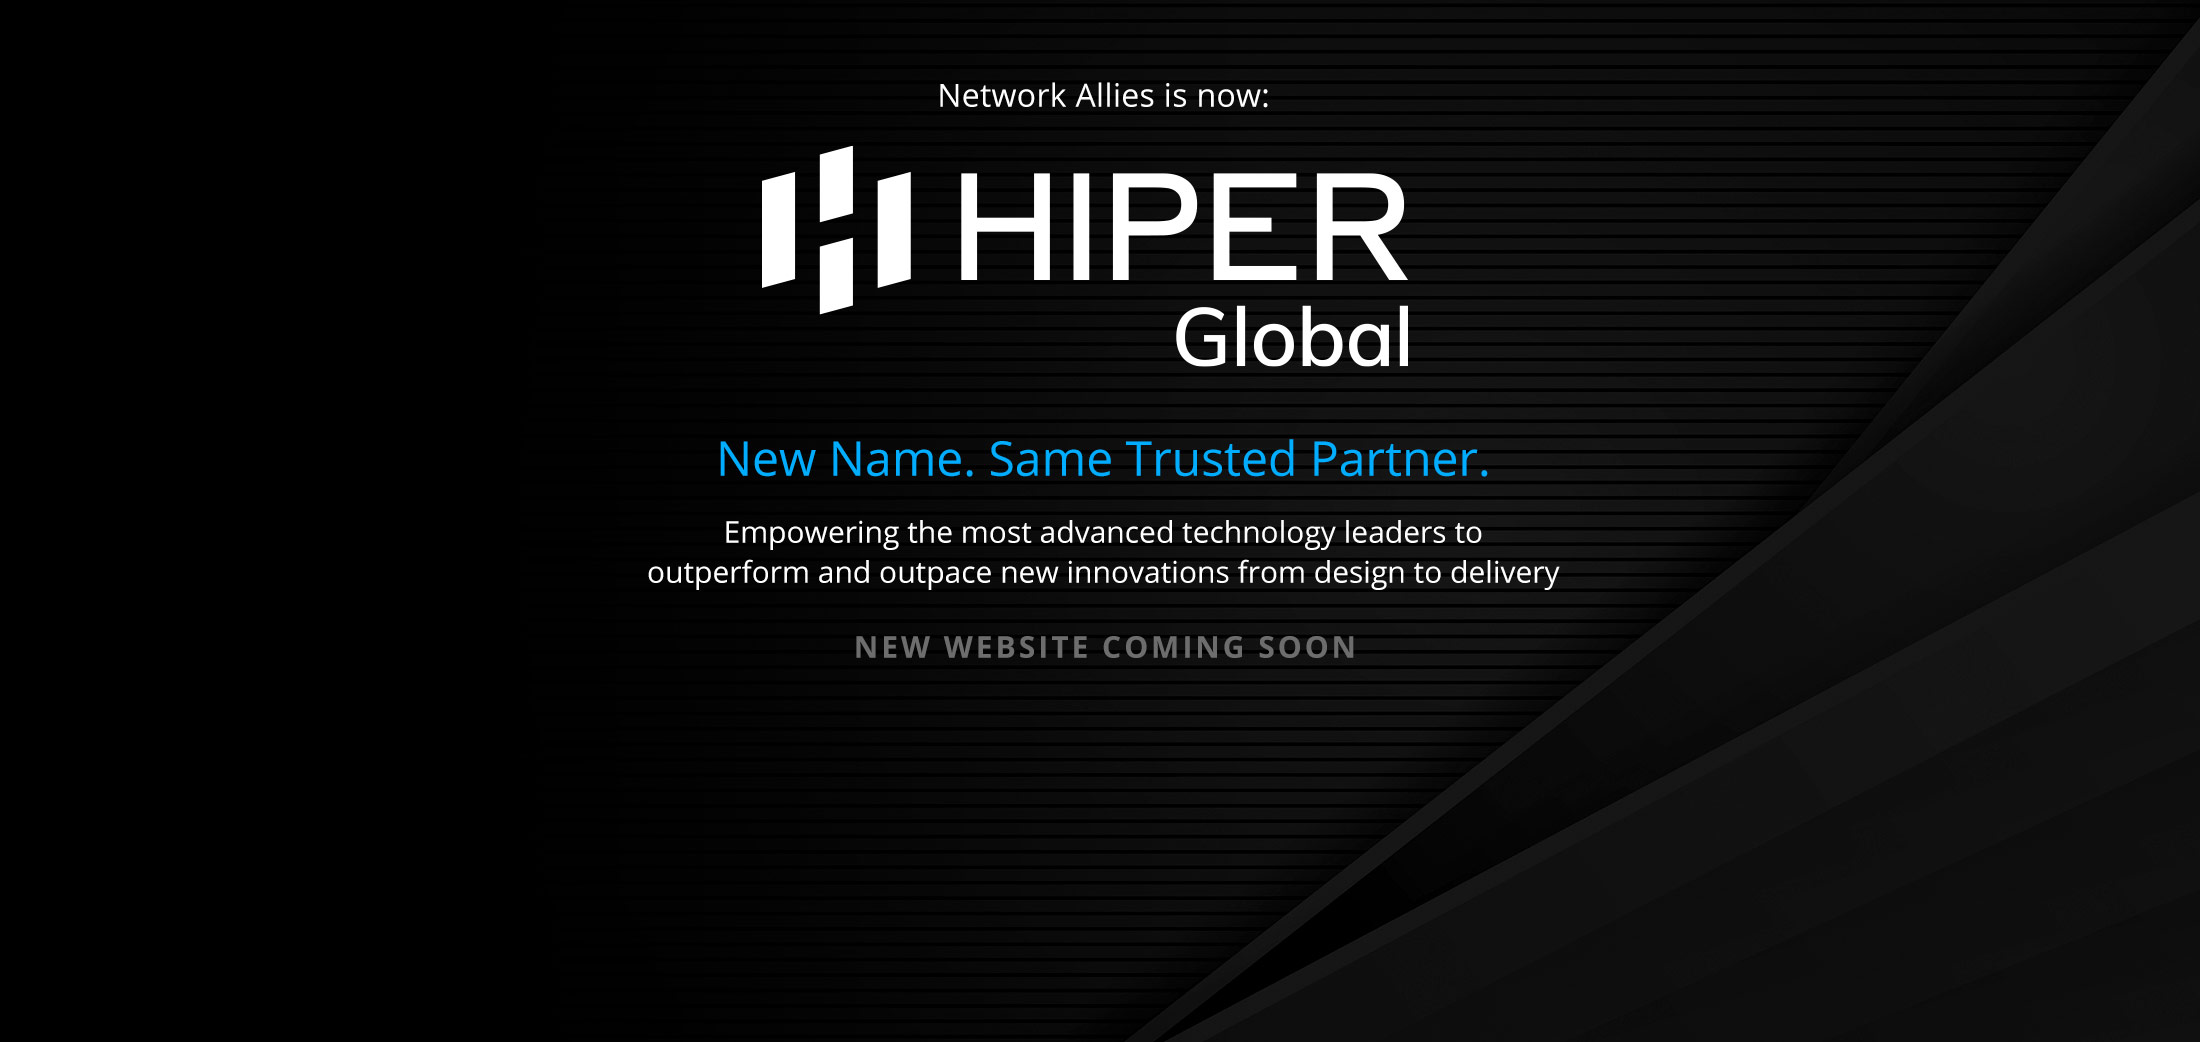 Network Allies is now HIPER Global US